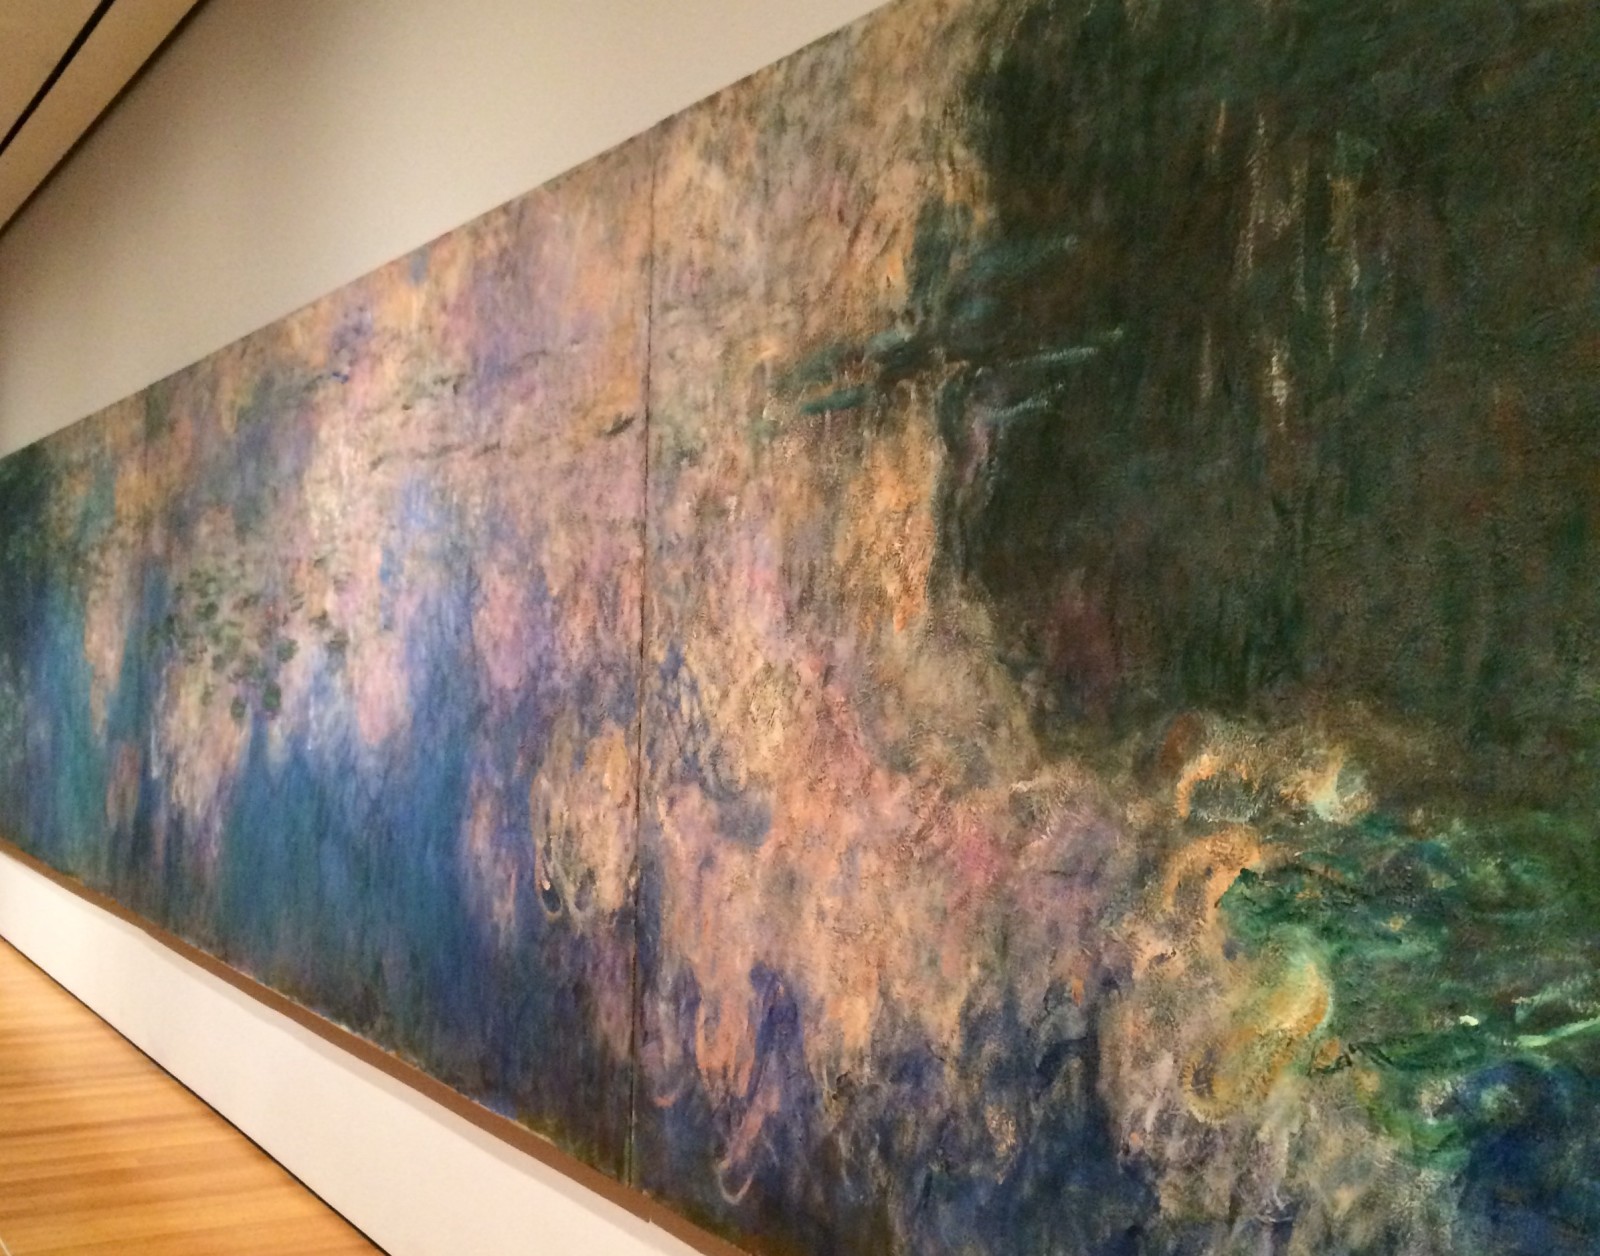 Monet's Water Lilies at MOMA